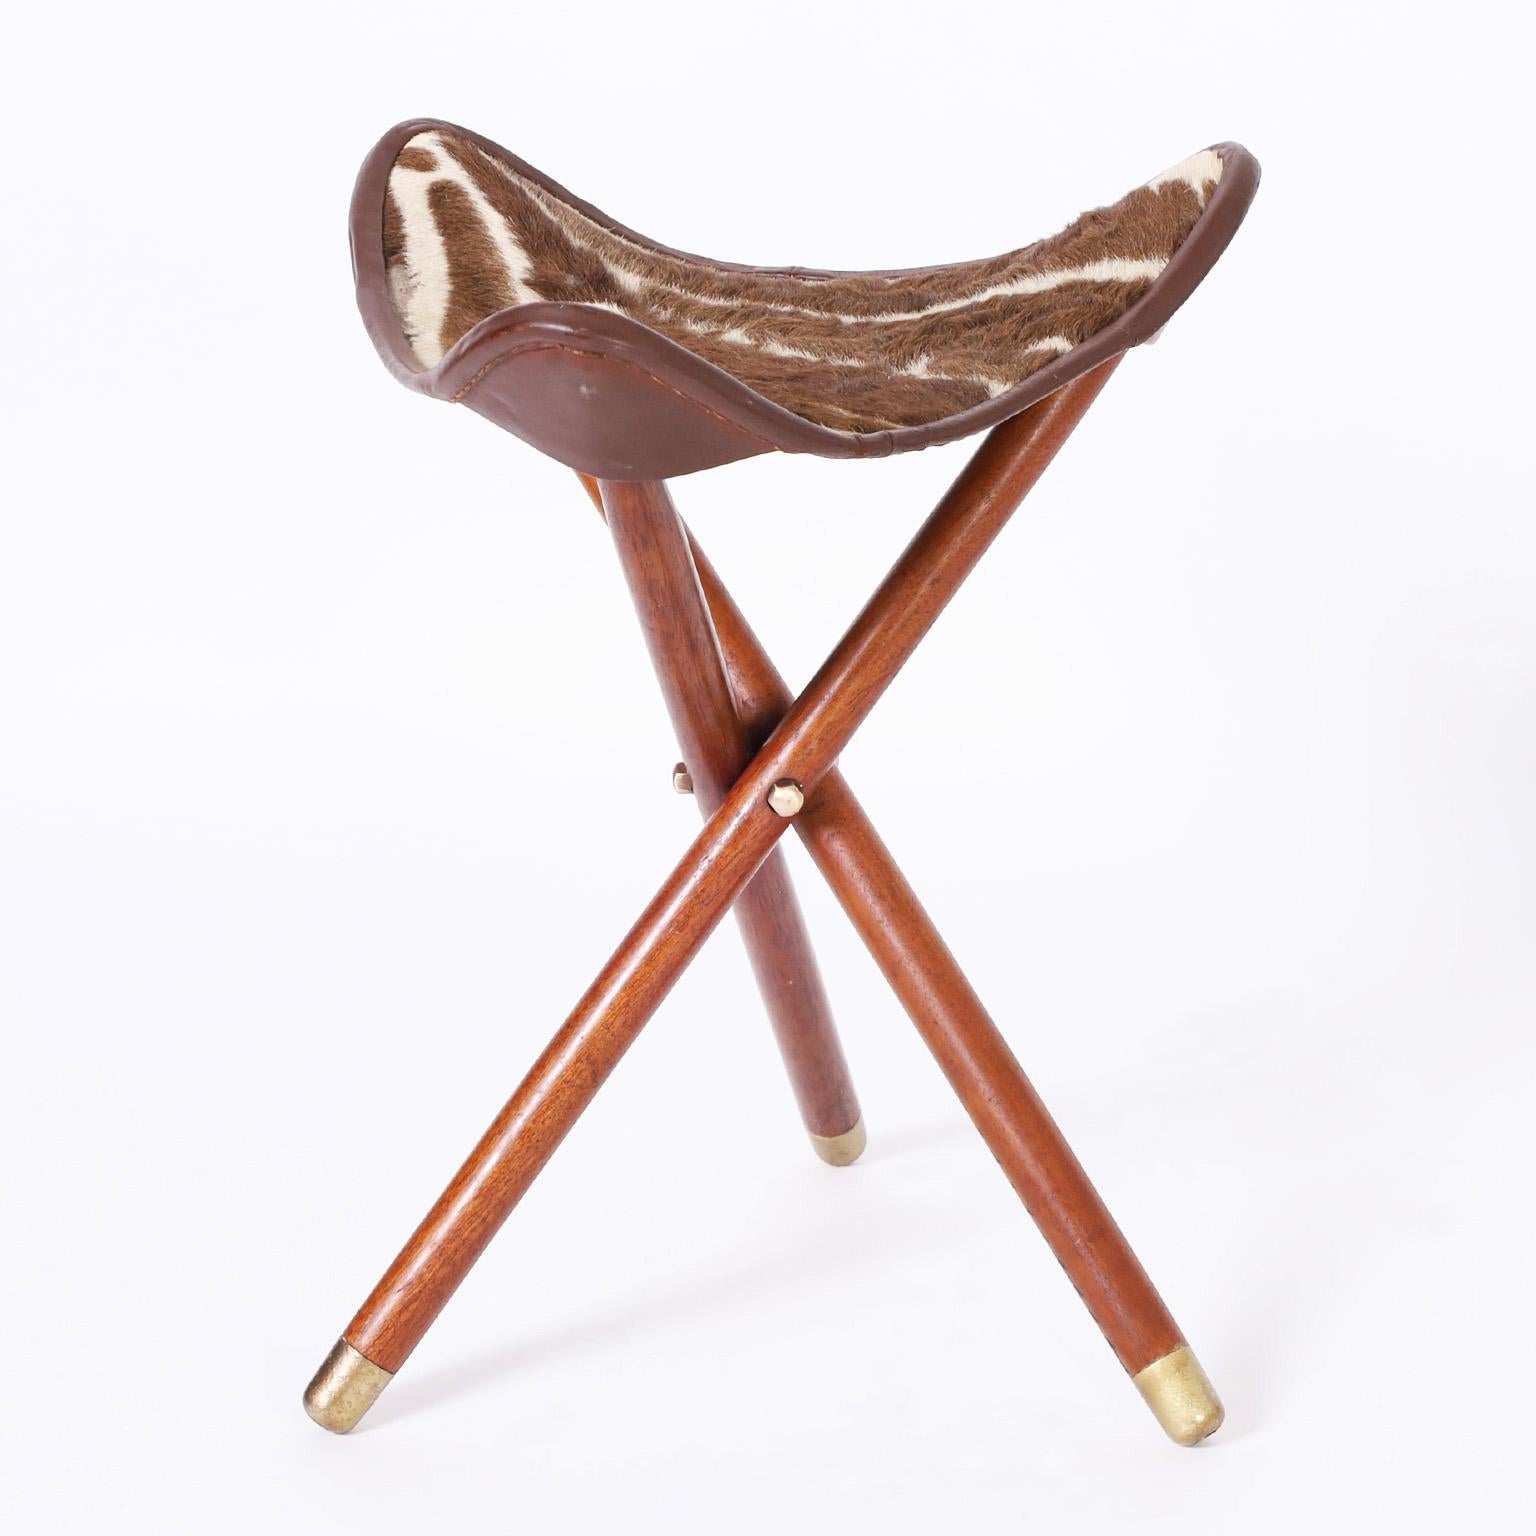 Midcentury British Colonial style folding zebra hide seat fitted to three mahogany legs with brass feet.